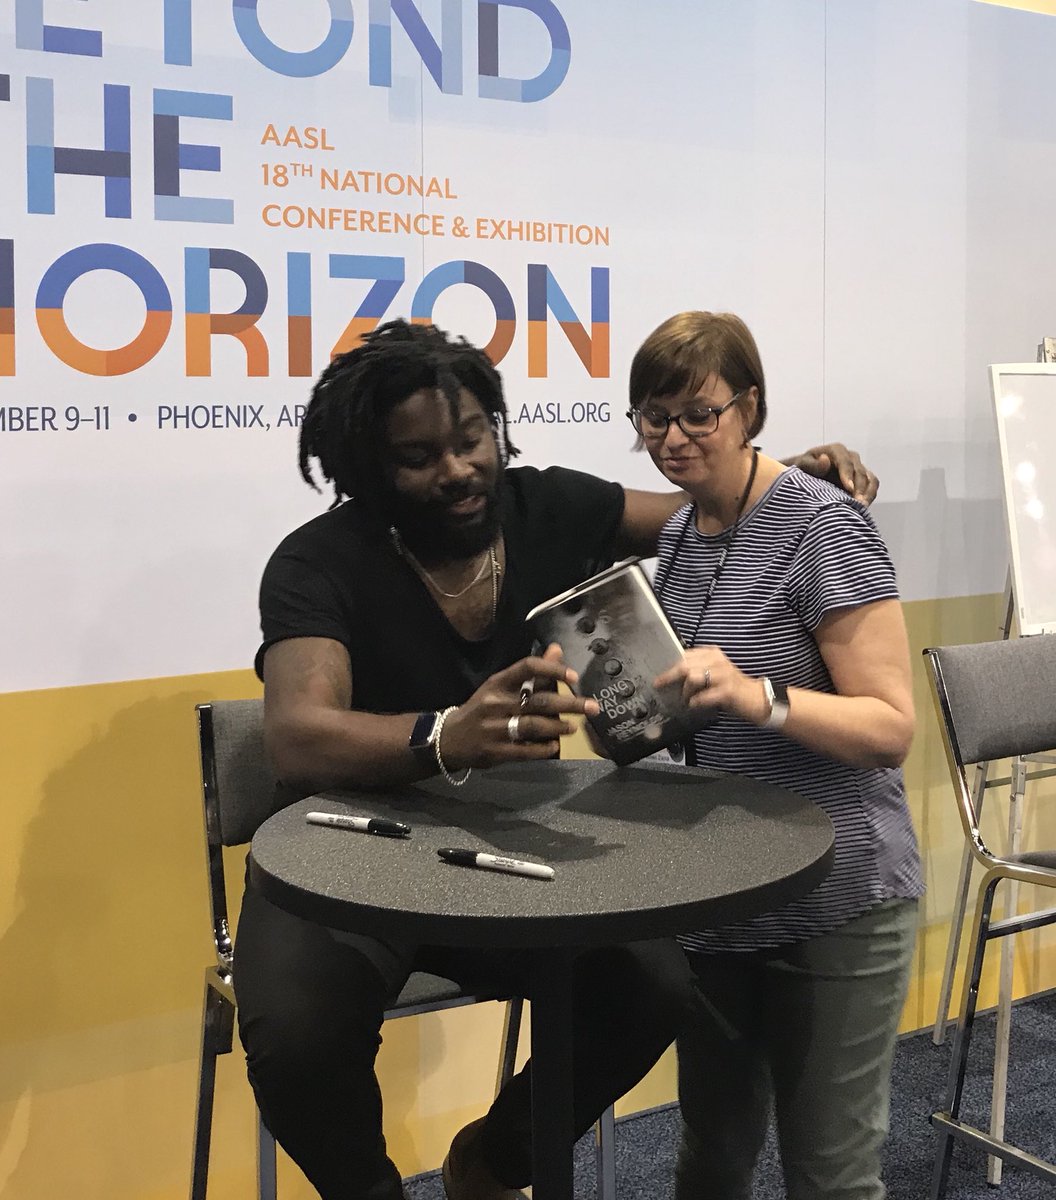 Met Jason Reynolds!  Can’t wait to dig into Long Way Down! #aasl17 @VHHSLibrary